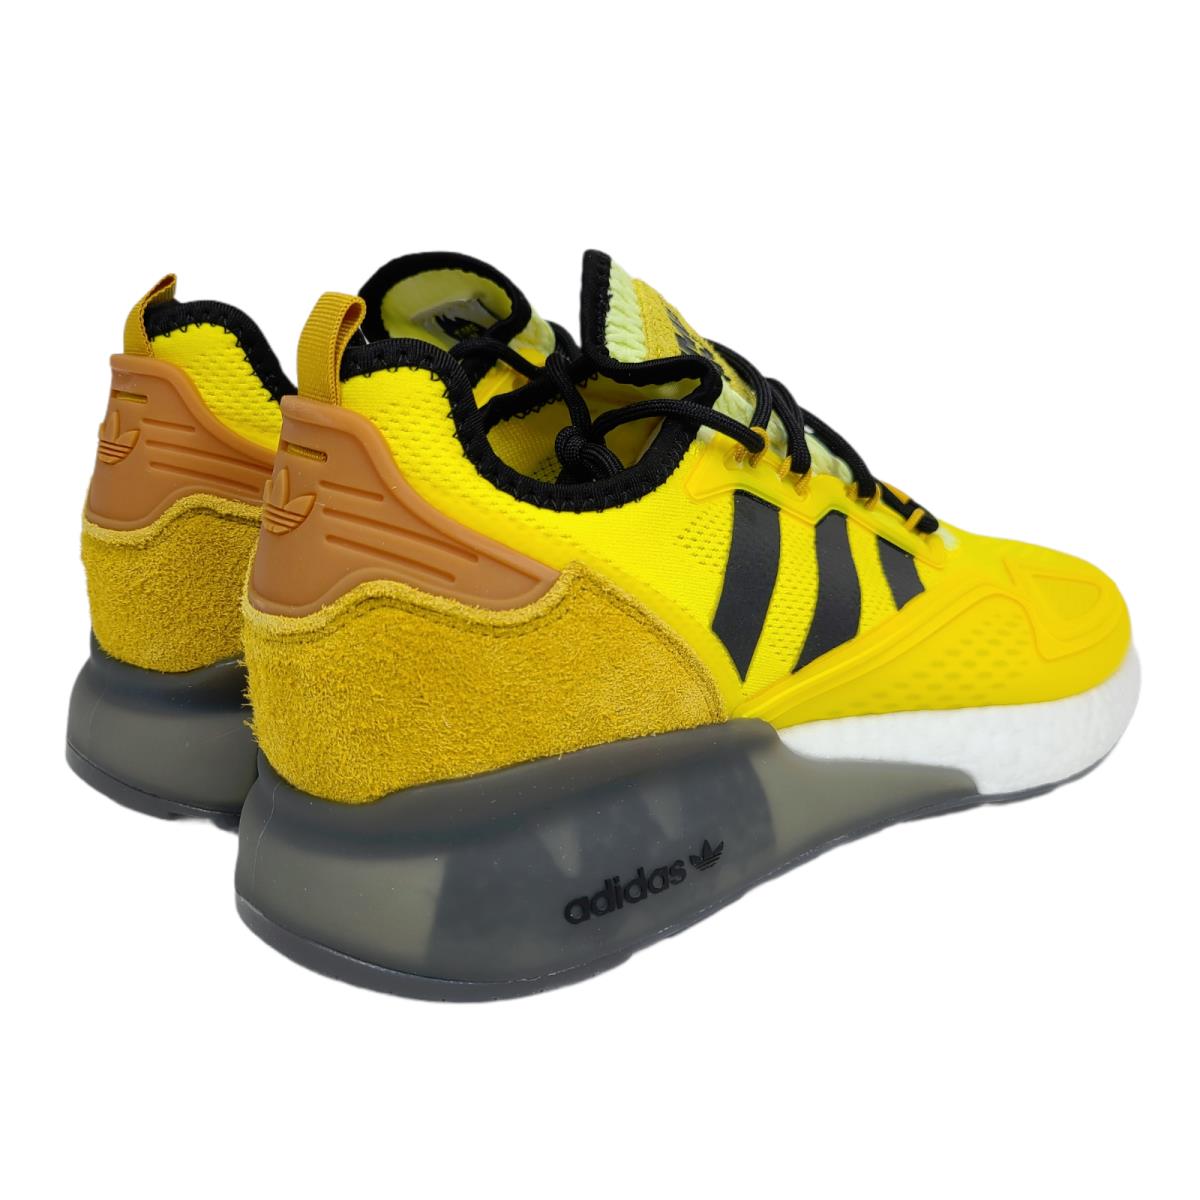 Adidas shoes Boost - Yellow 24